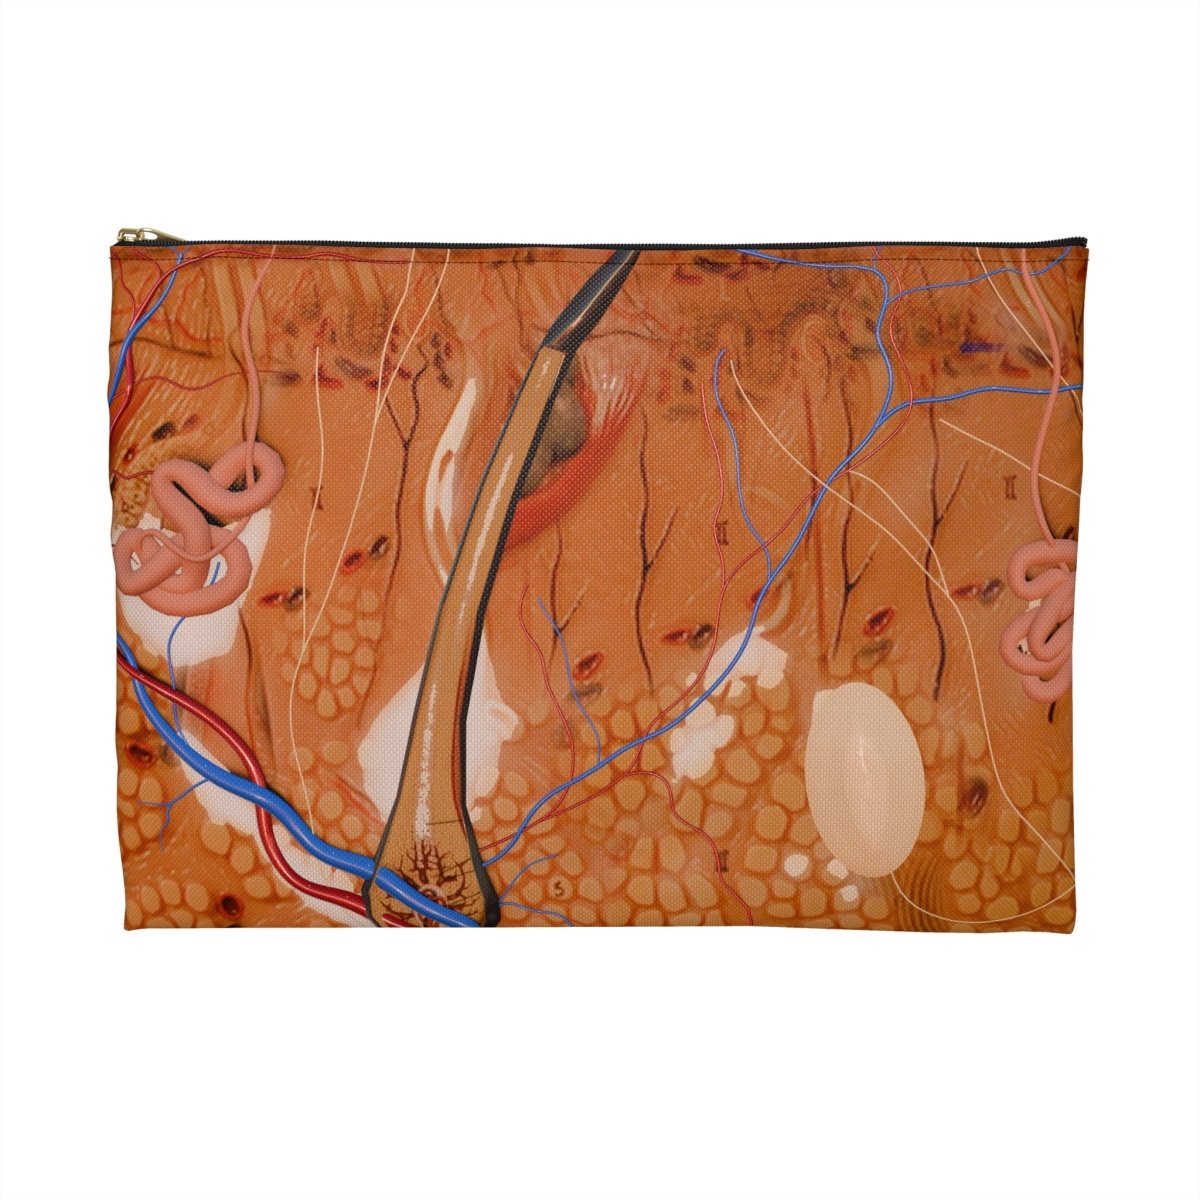 Medical Pouch - Anatomy - Flat Pouch